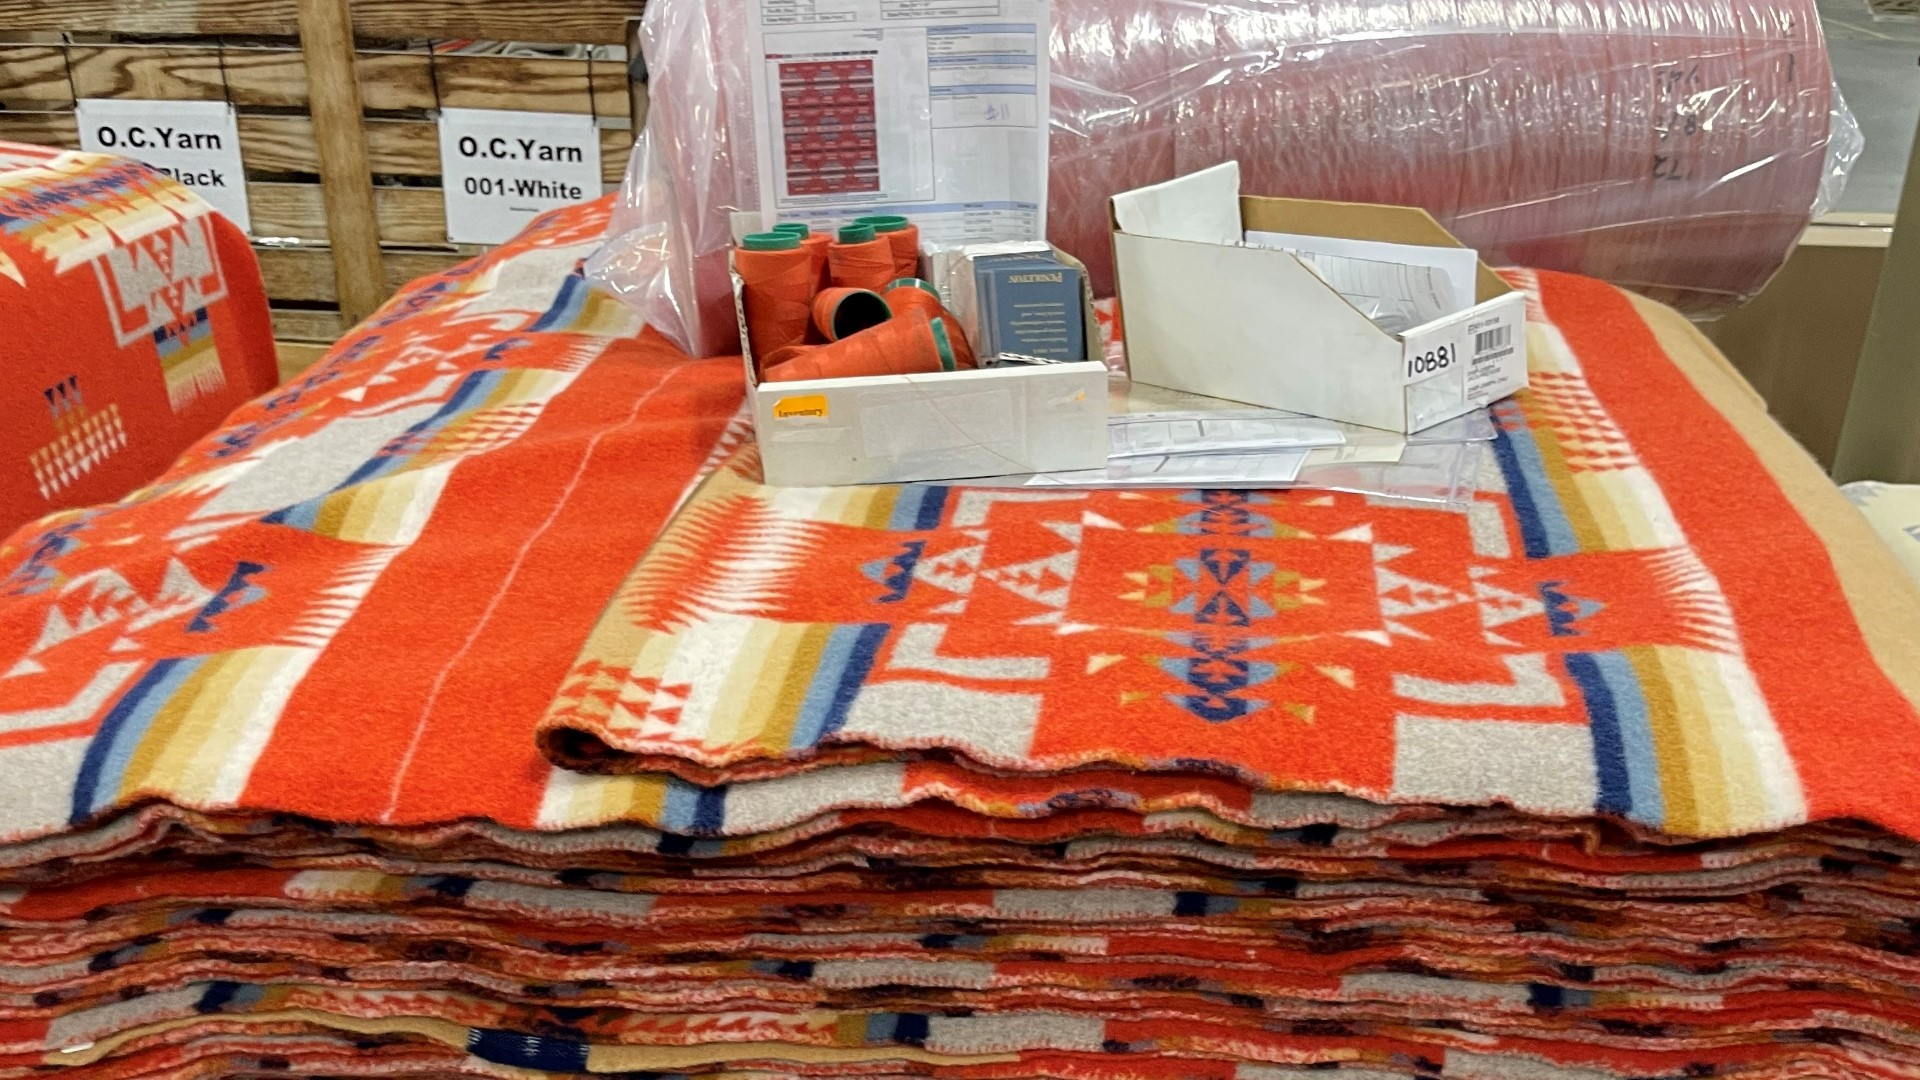 Tour the factory that makes more than 1,000 of these iconic blankets per day. #k5evening